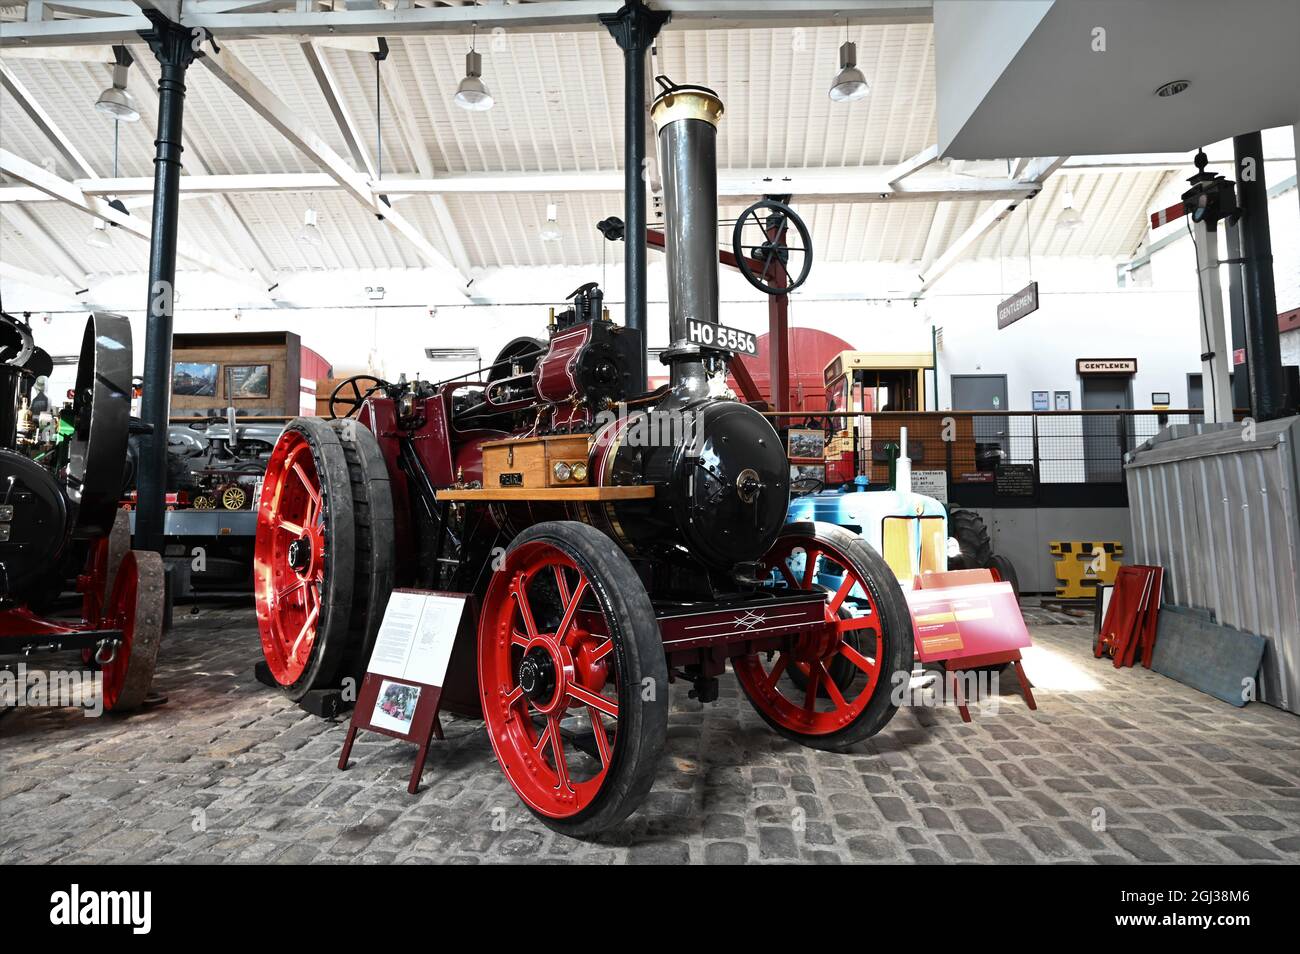 A traction engine in Bury, Lancashire. Stock Photo